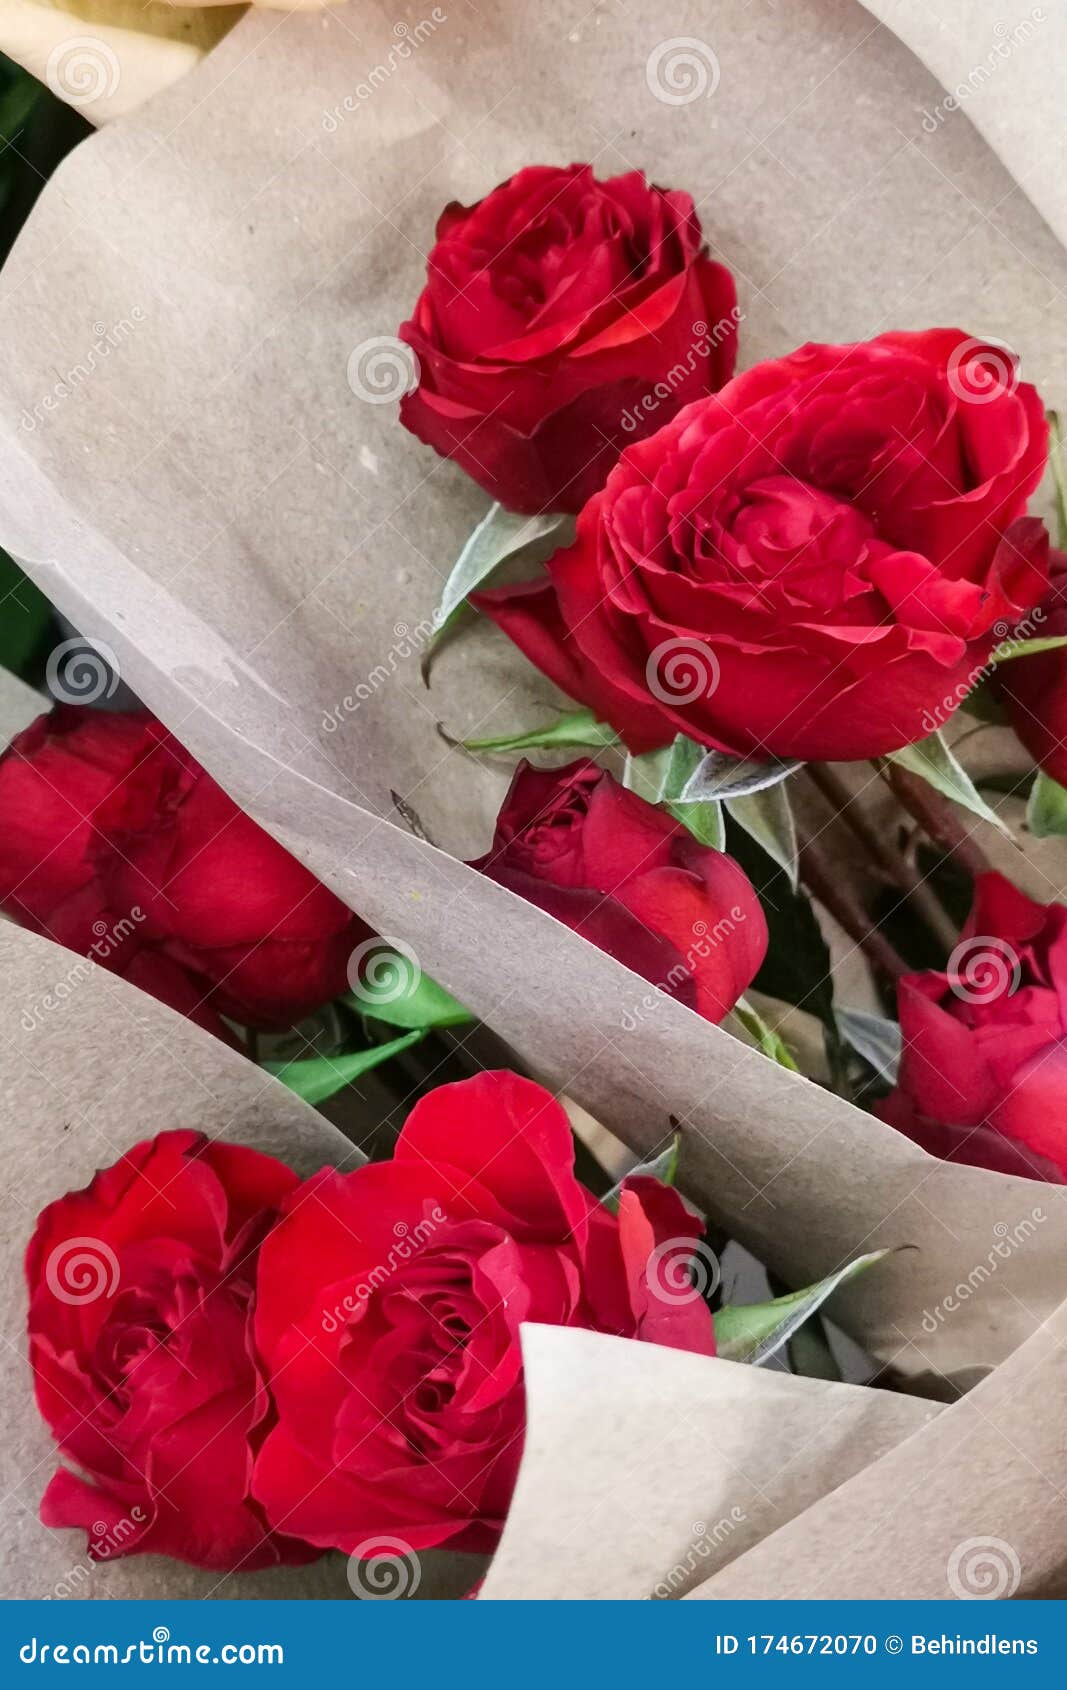 Red Romantic Rose Bouquet Prepare For Special Lovely Event ...